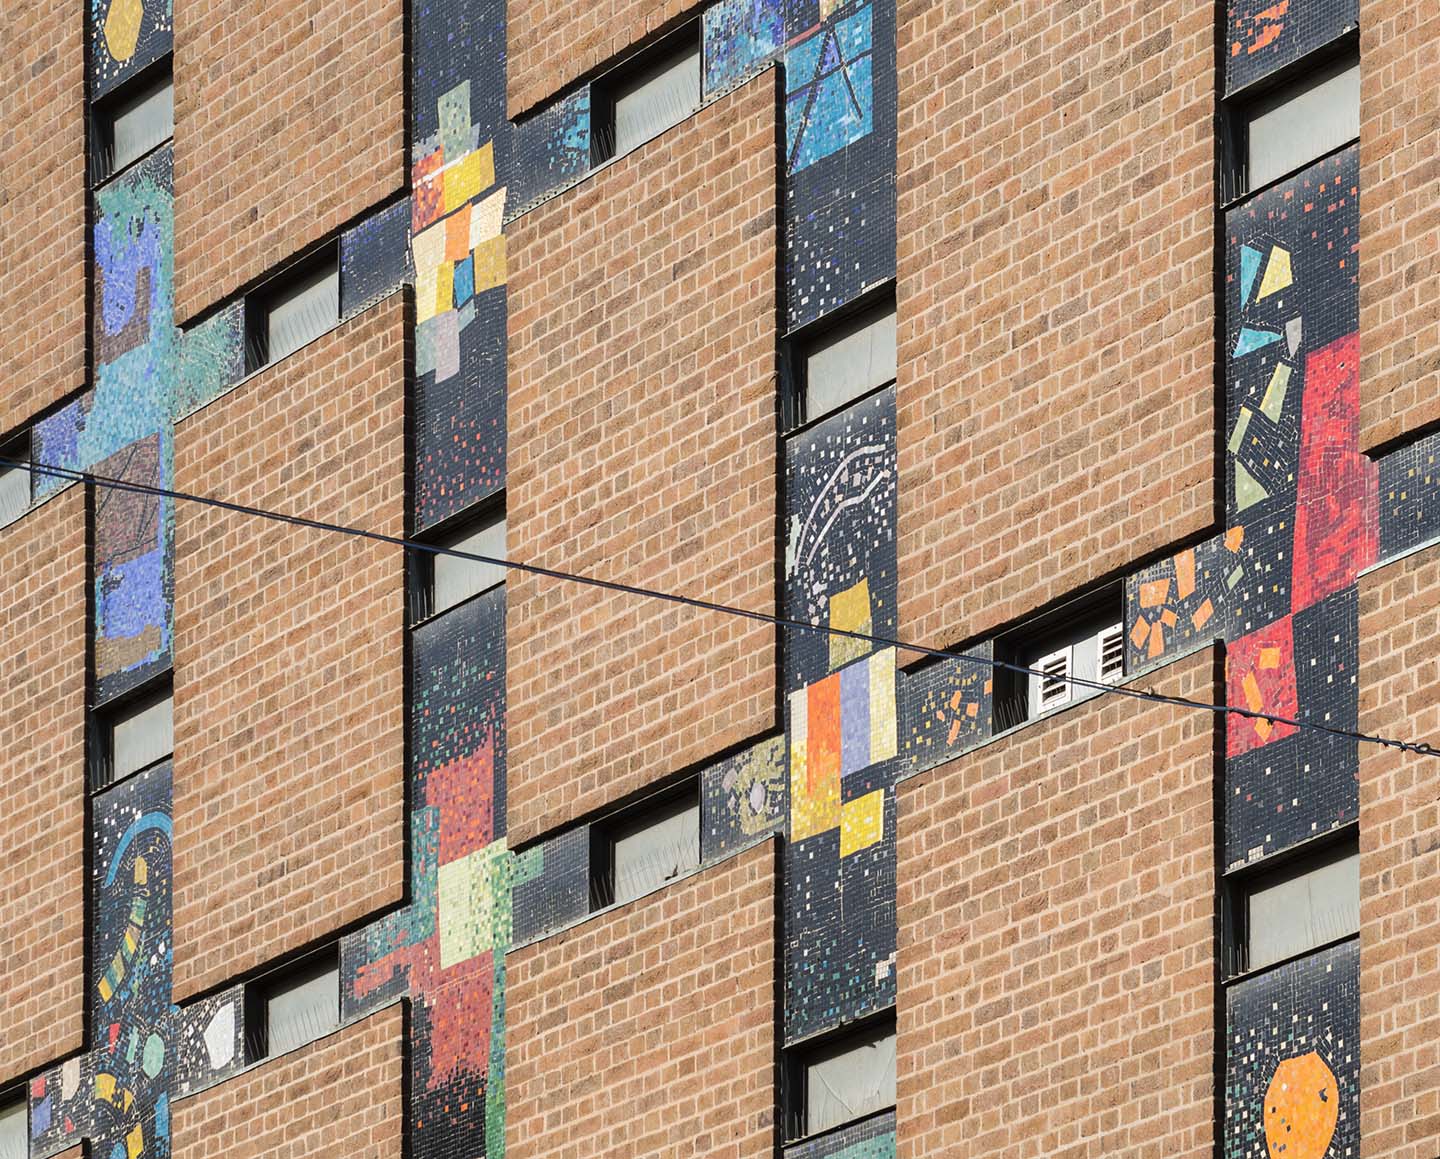 Locarno dancehall (now City Library), Lower Precinct/Smithford Way. Detail of the façade showing the glass mosaic decoration